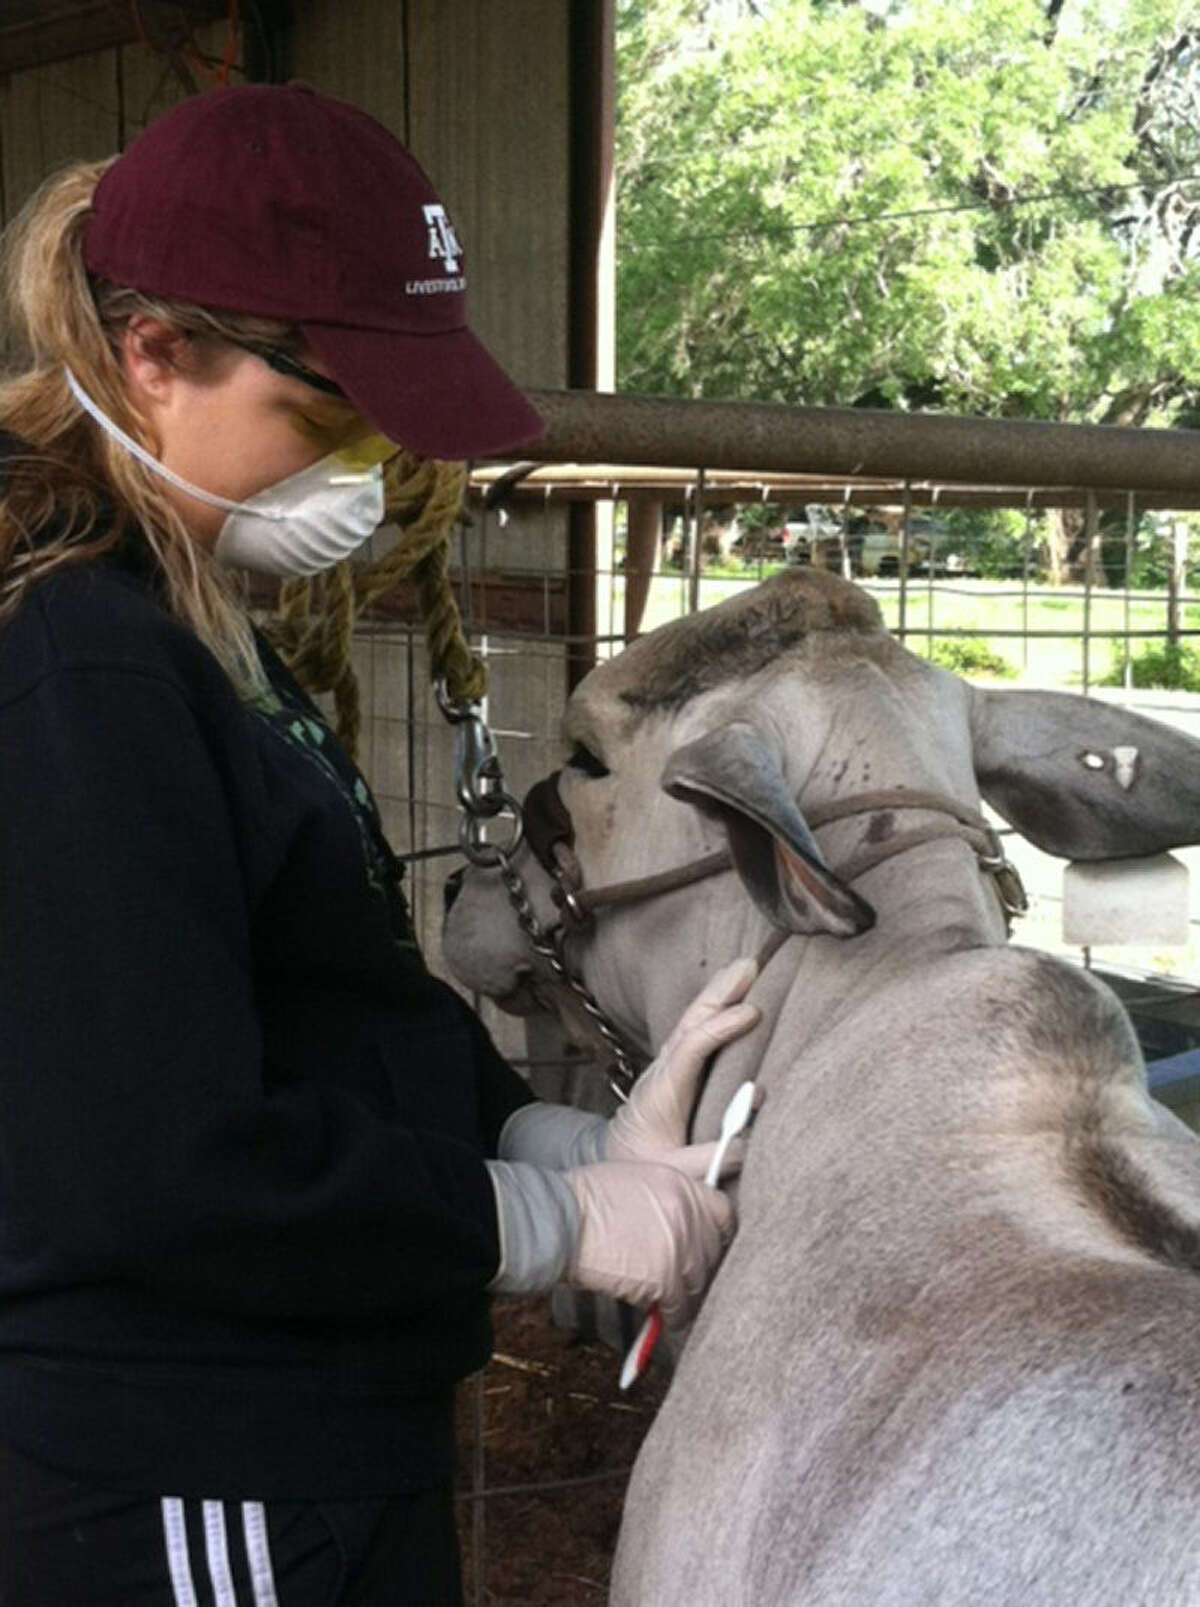 ABOVE RIGHT: Kylie Patterson carefully takes samples from the hide of a bovine earlier this year for her award-winning research project. ABOVE LEFT: Kylie Patterson's Brahman reaches up to her for a little love as she pours out feed. Patterson has won numerous state and national awards for her agriculture and science projects.